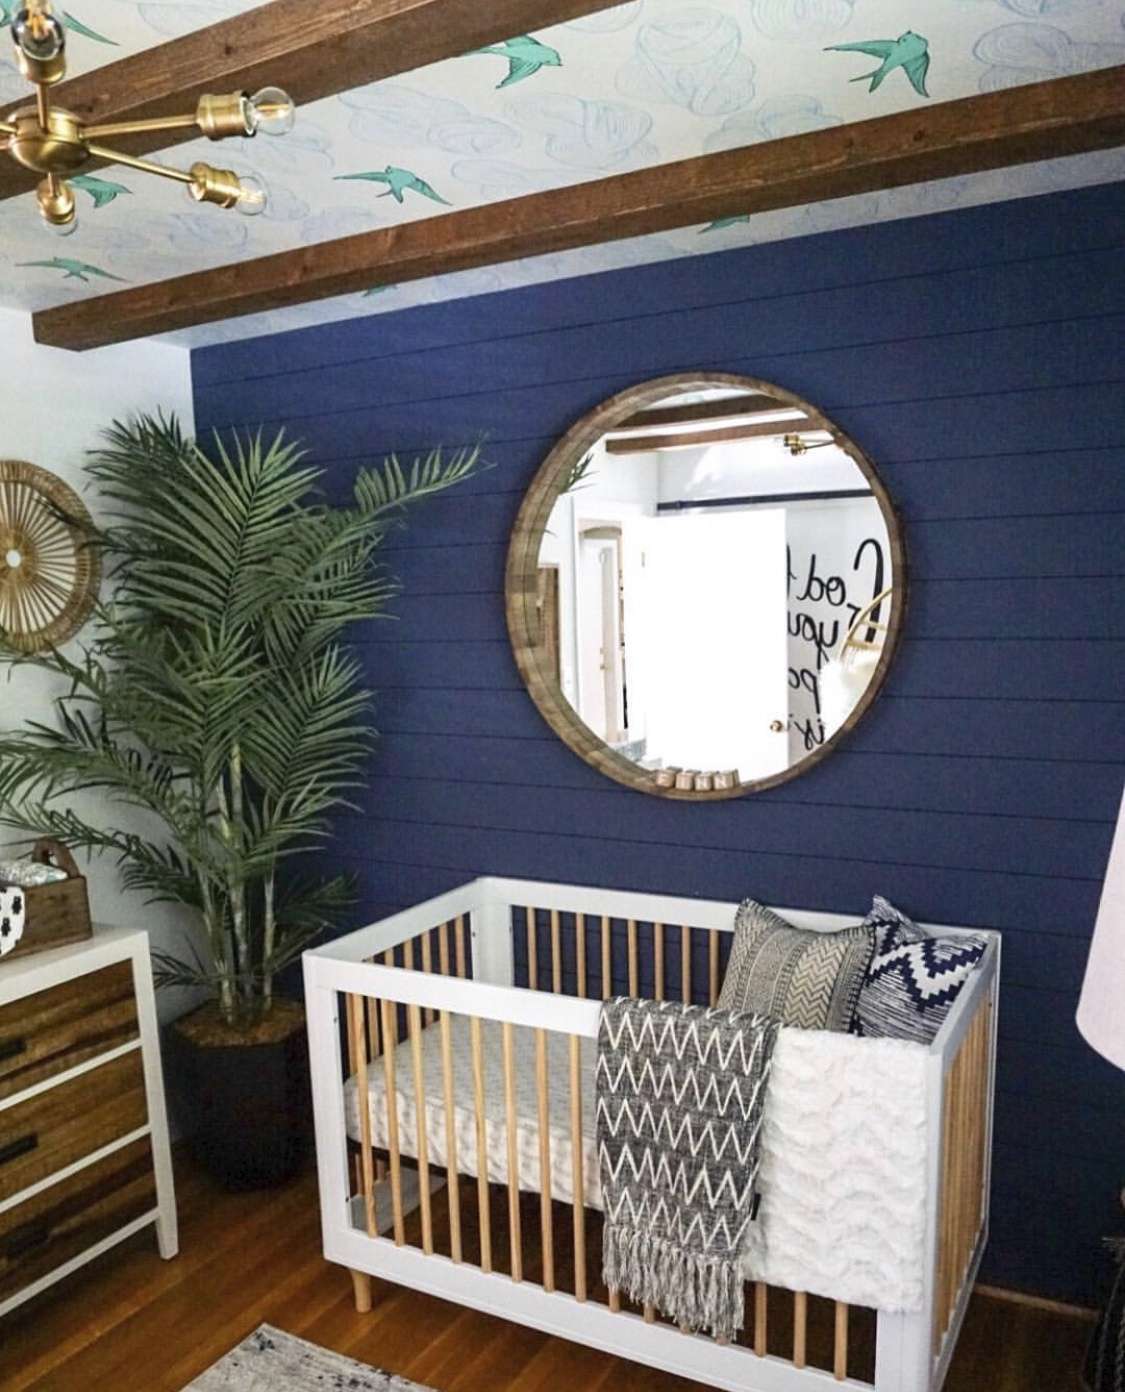 wallpaper mural used on the ceiling of a nursery, that also features painted shiplap, wood beams, and a large mirror